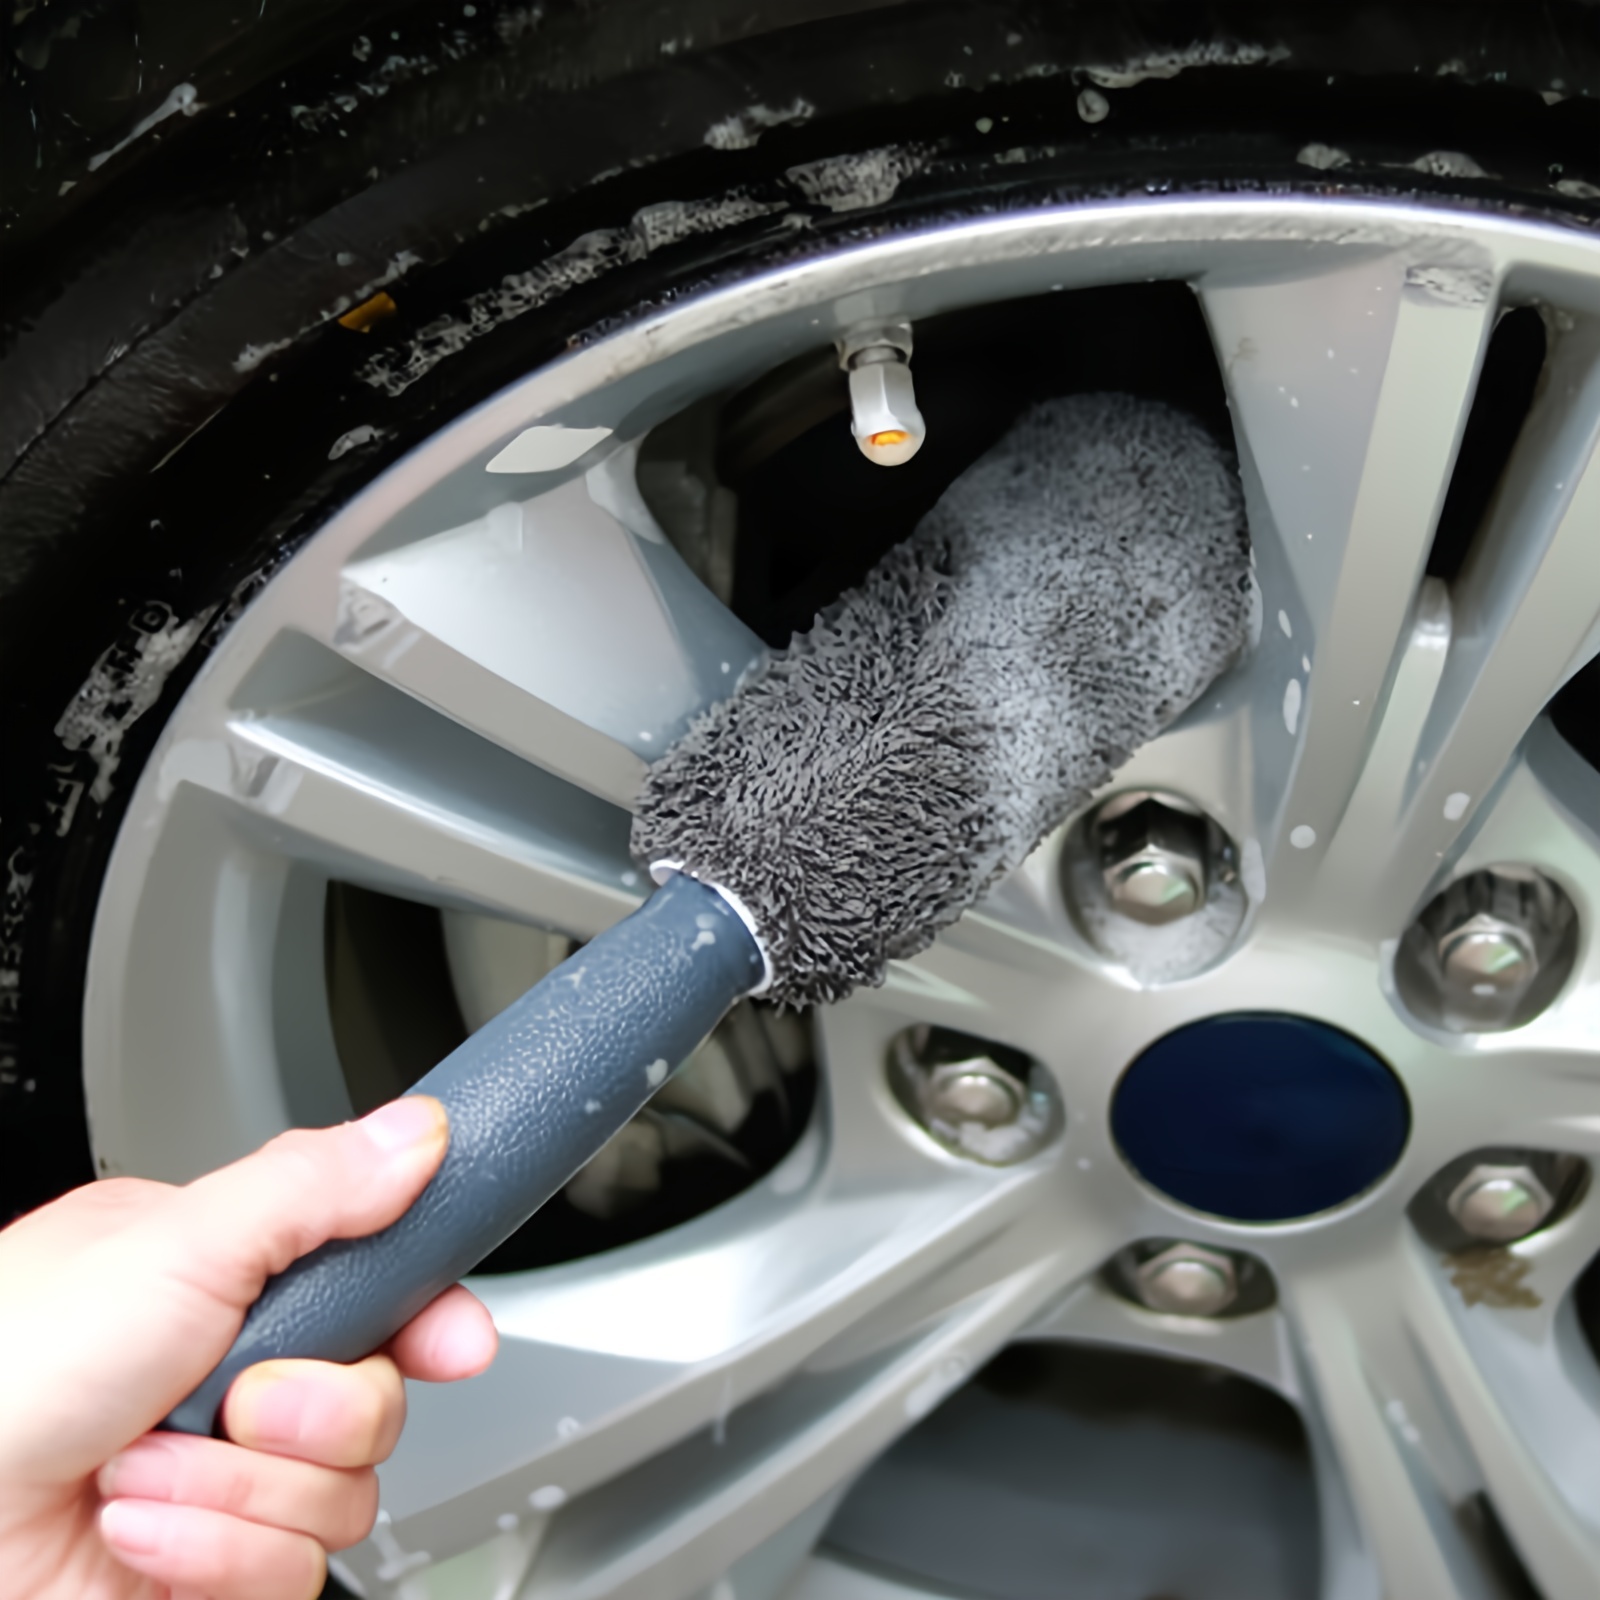 Soft Microfiber Car Rim Brush Set Scratch Free Wheel Cleaning Tool  Removable Steel Rim Brush for Car Truck Motorcycles Detailing - AliExpress